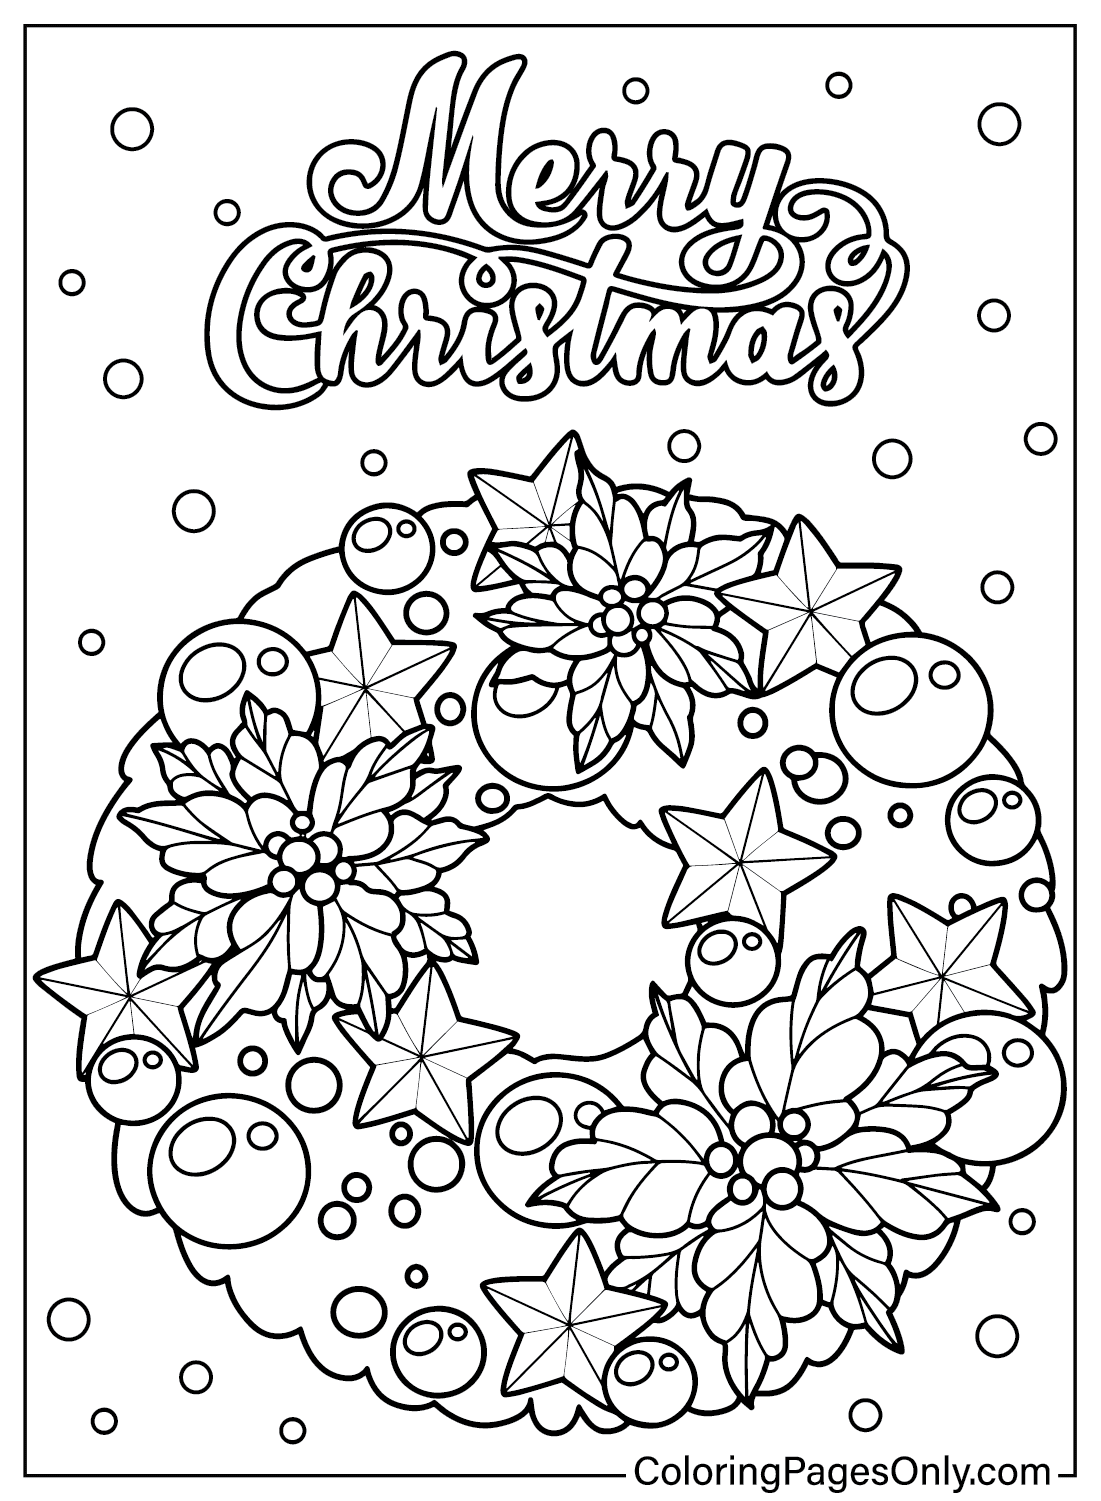 Christmas Wreath Coloring Sheet for Kids - Free Printable Coloring Pages